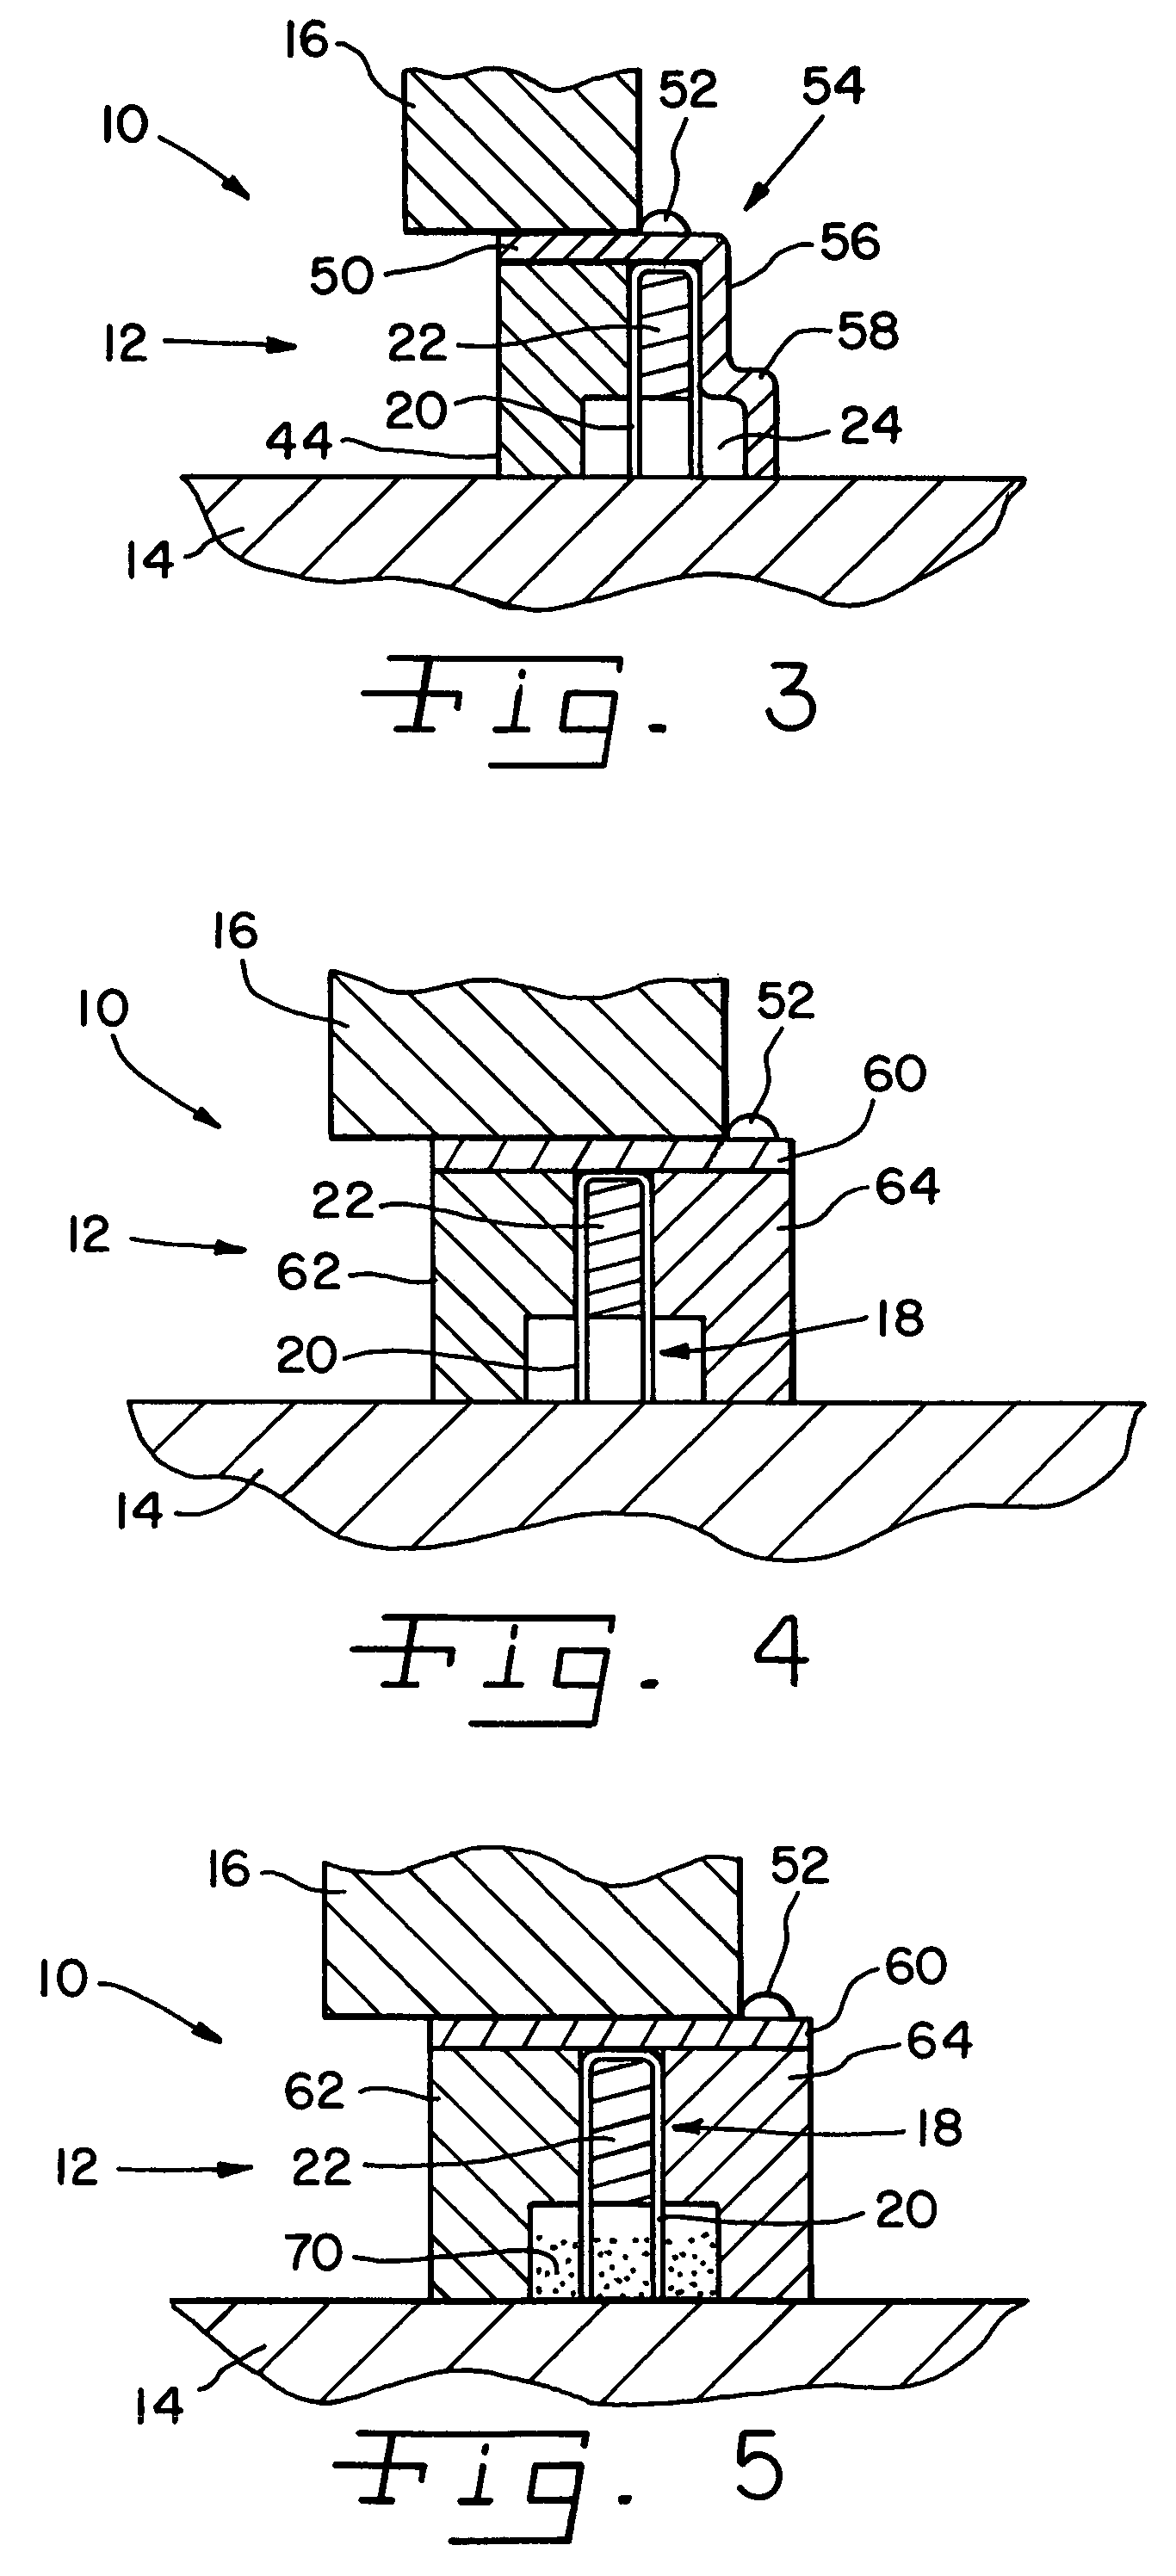 Grounding brush for mitigating electrical current on motor shafts